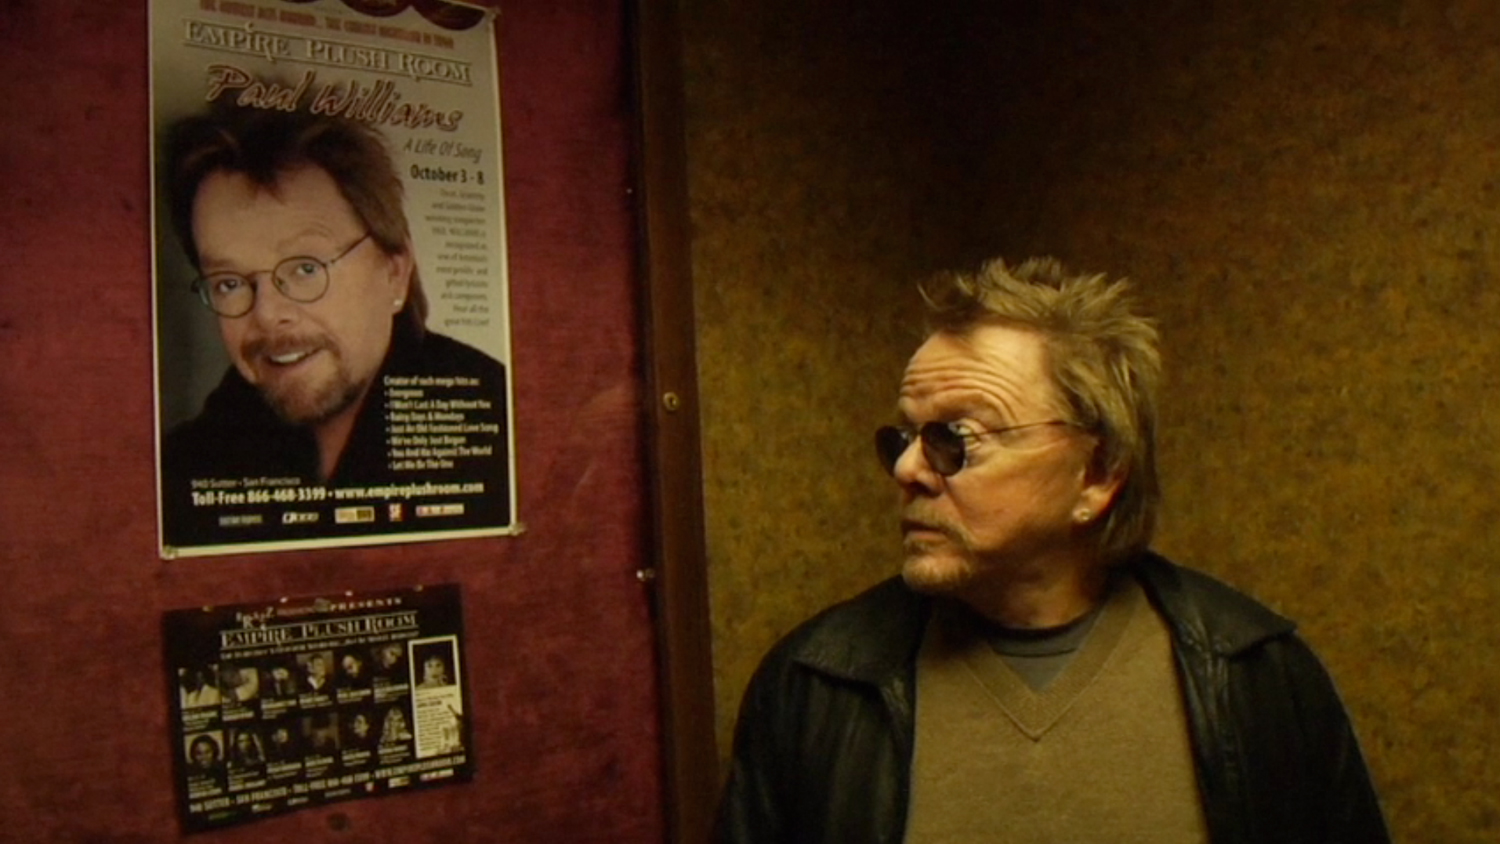 PAUL WILLIAMS STILL ALIVE Available on Blu-ray/DVD February 5th